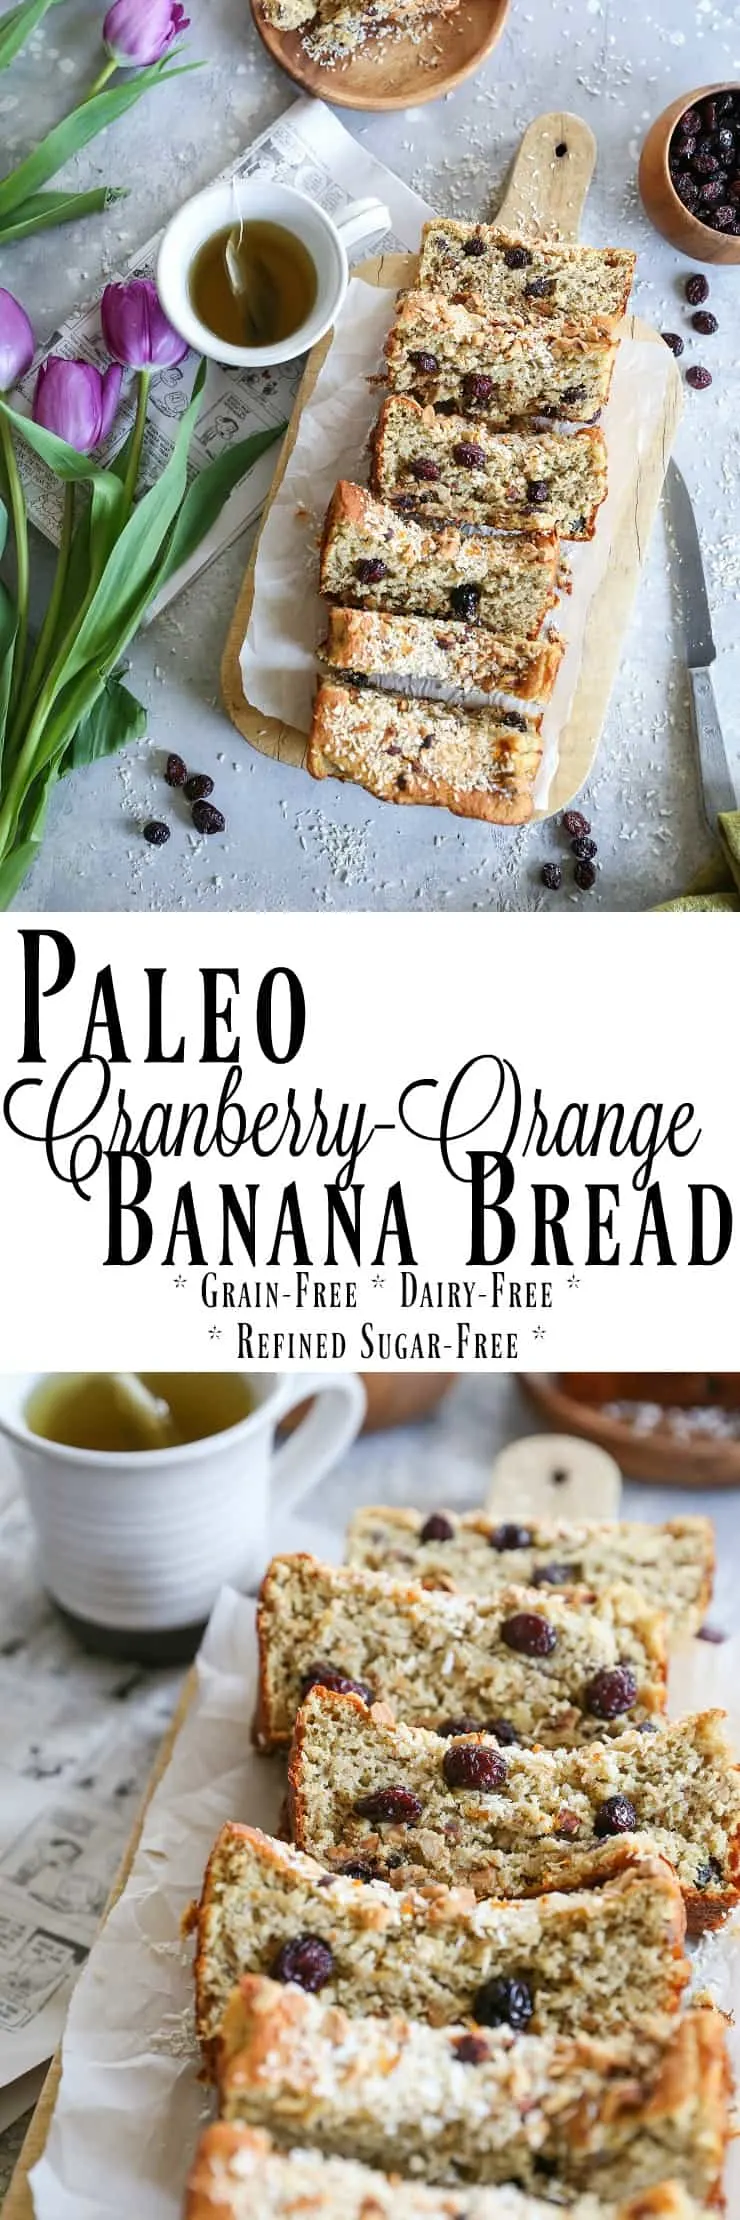 Paleo Cranberry Orange Bread made with almond flour and sweetened with bananas - this grain-free, refined sugar-free treat is perfect for breakfast or snack